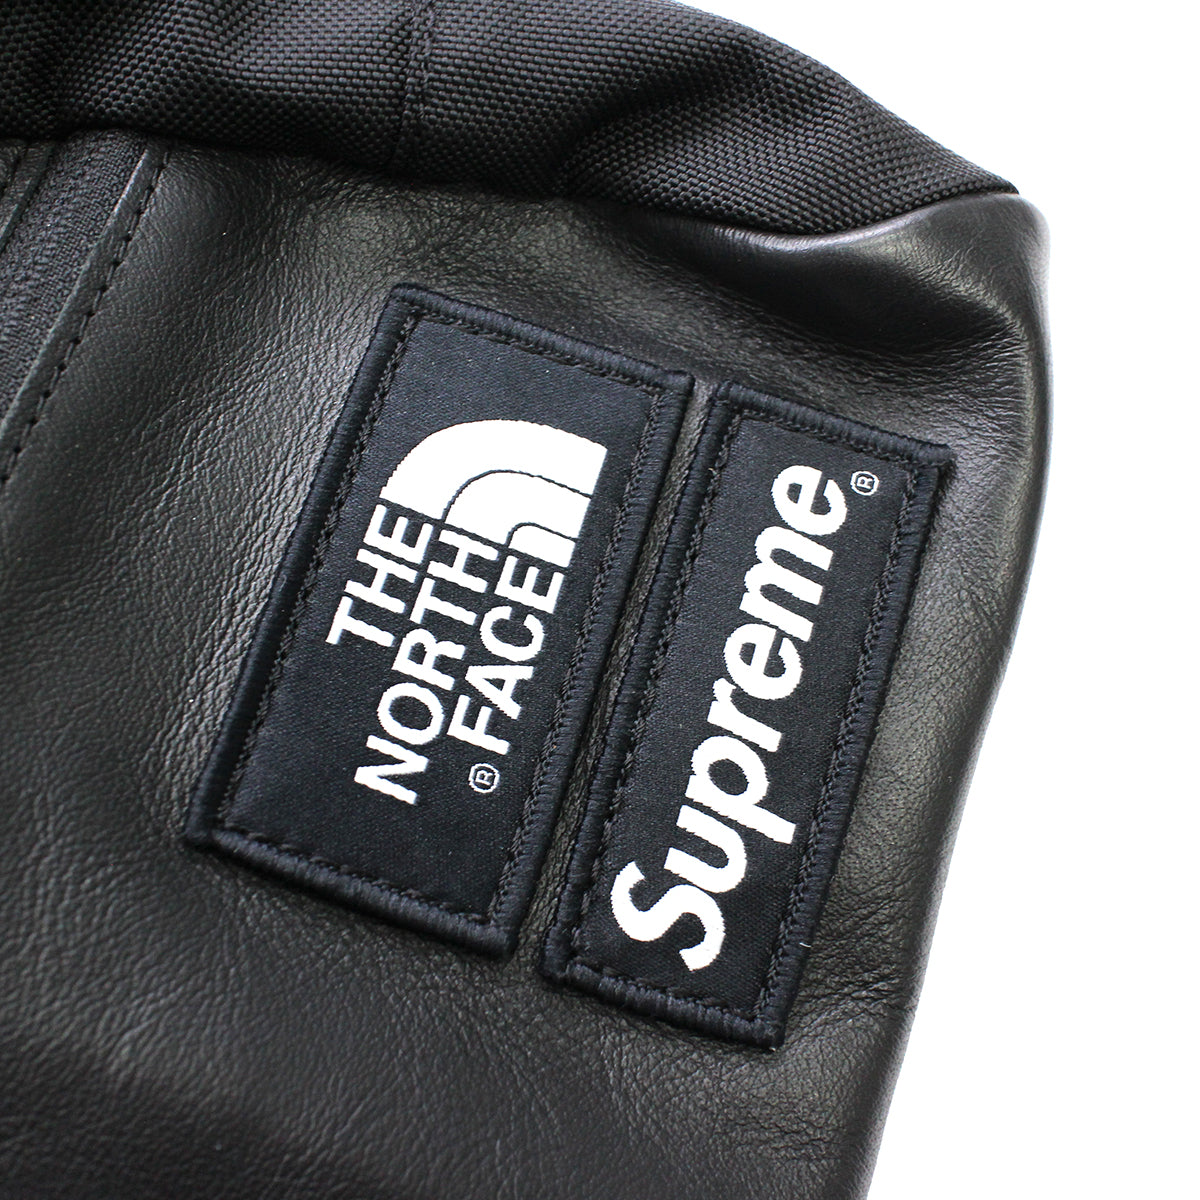 Supreme The North Face Leather Roo II Lumbar Pack - HUNDO P Buy&Sell